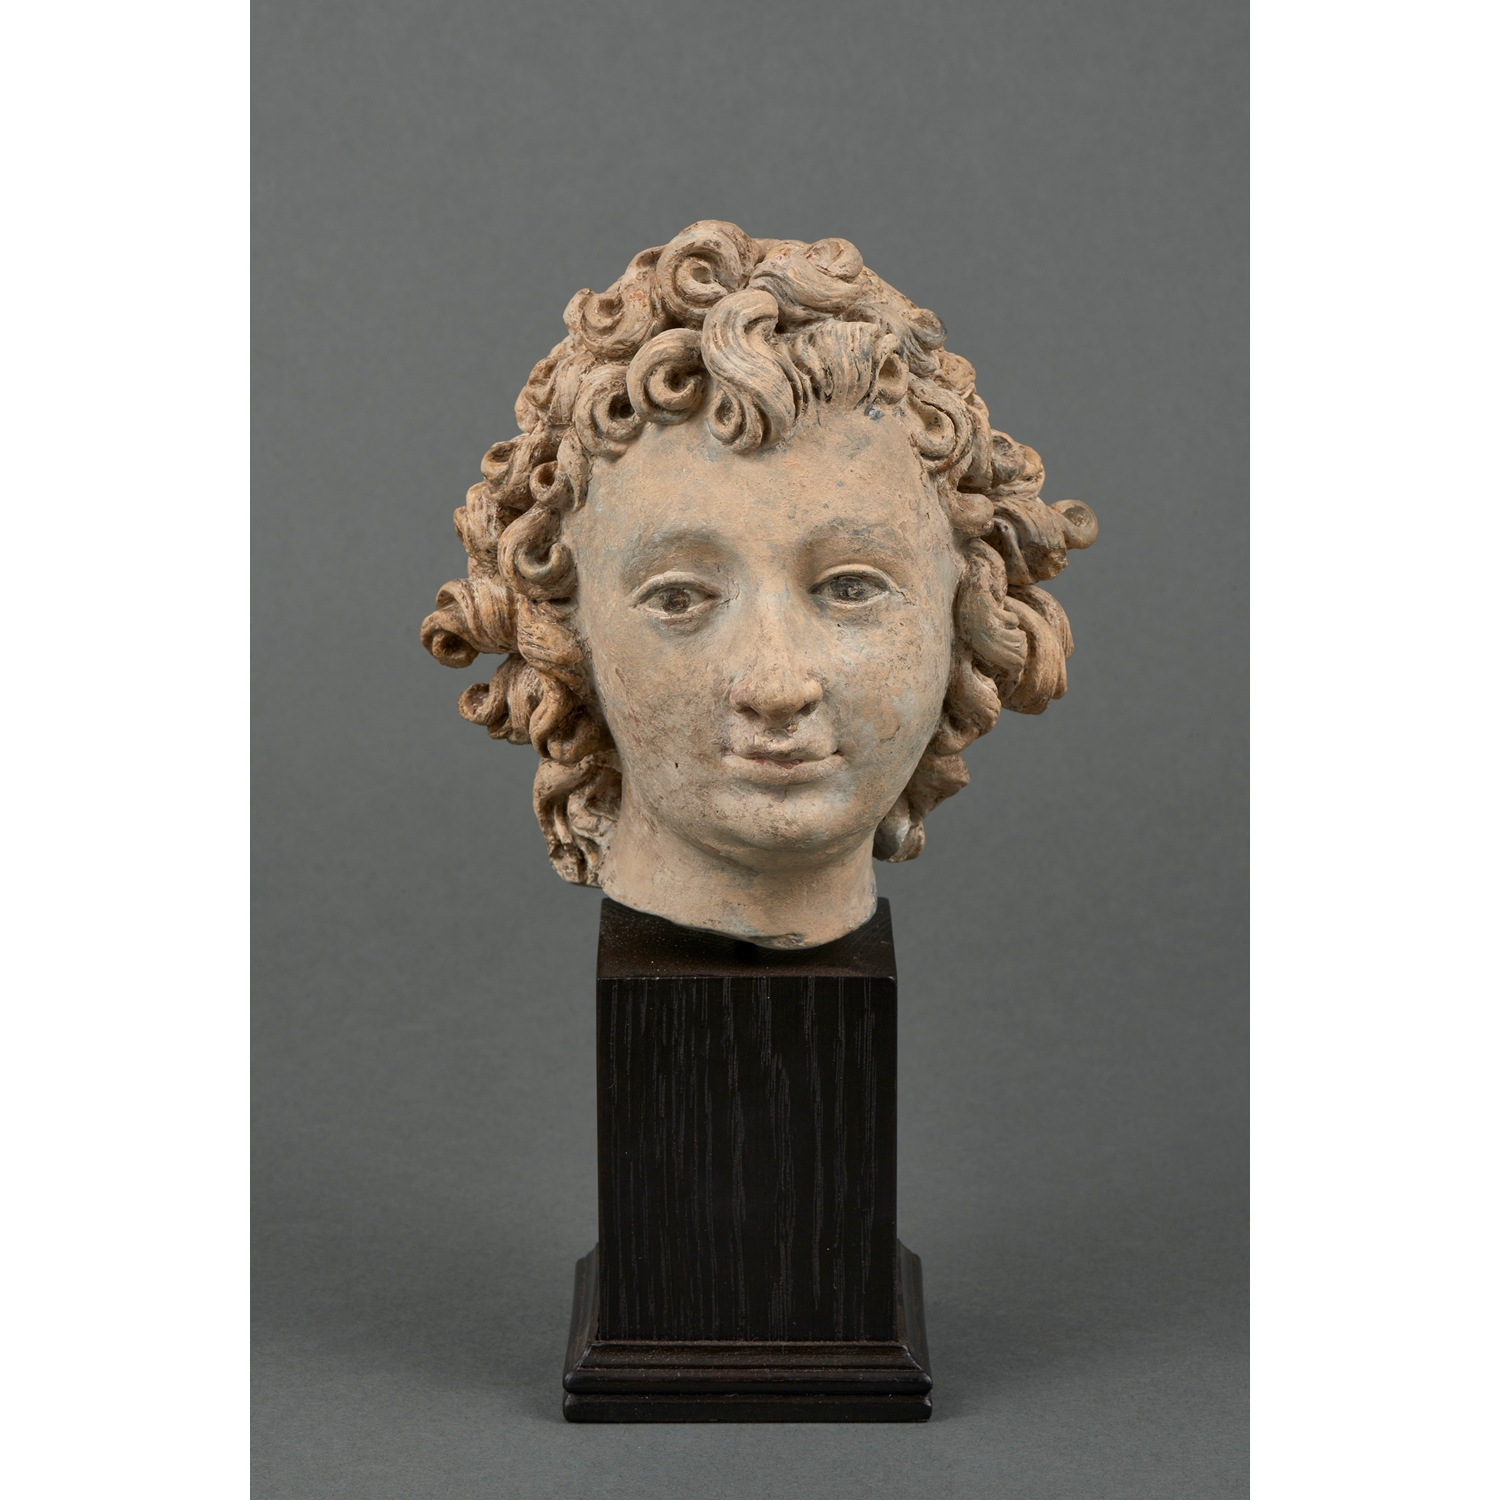 ATTRIBUTED TO GERVAIS I DELABARRE (-1644) HEAD OF AN ANGEL MAINE REGION FIRST QUARTER OF THE 17TH CENTURY